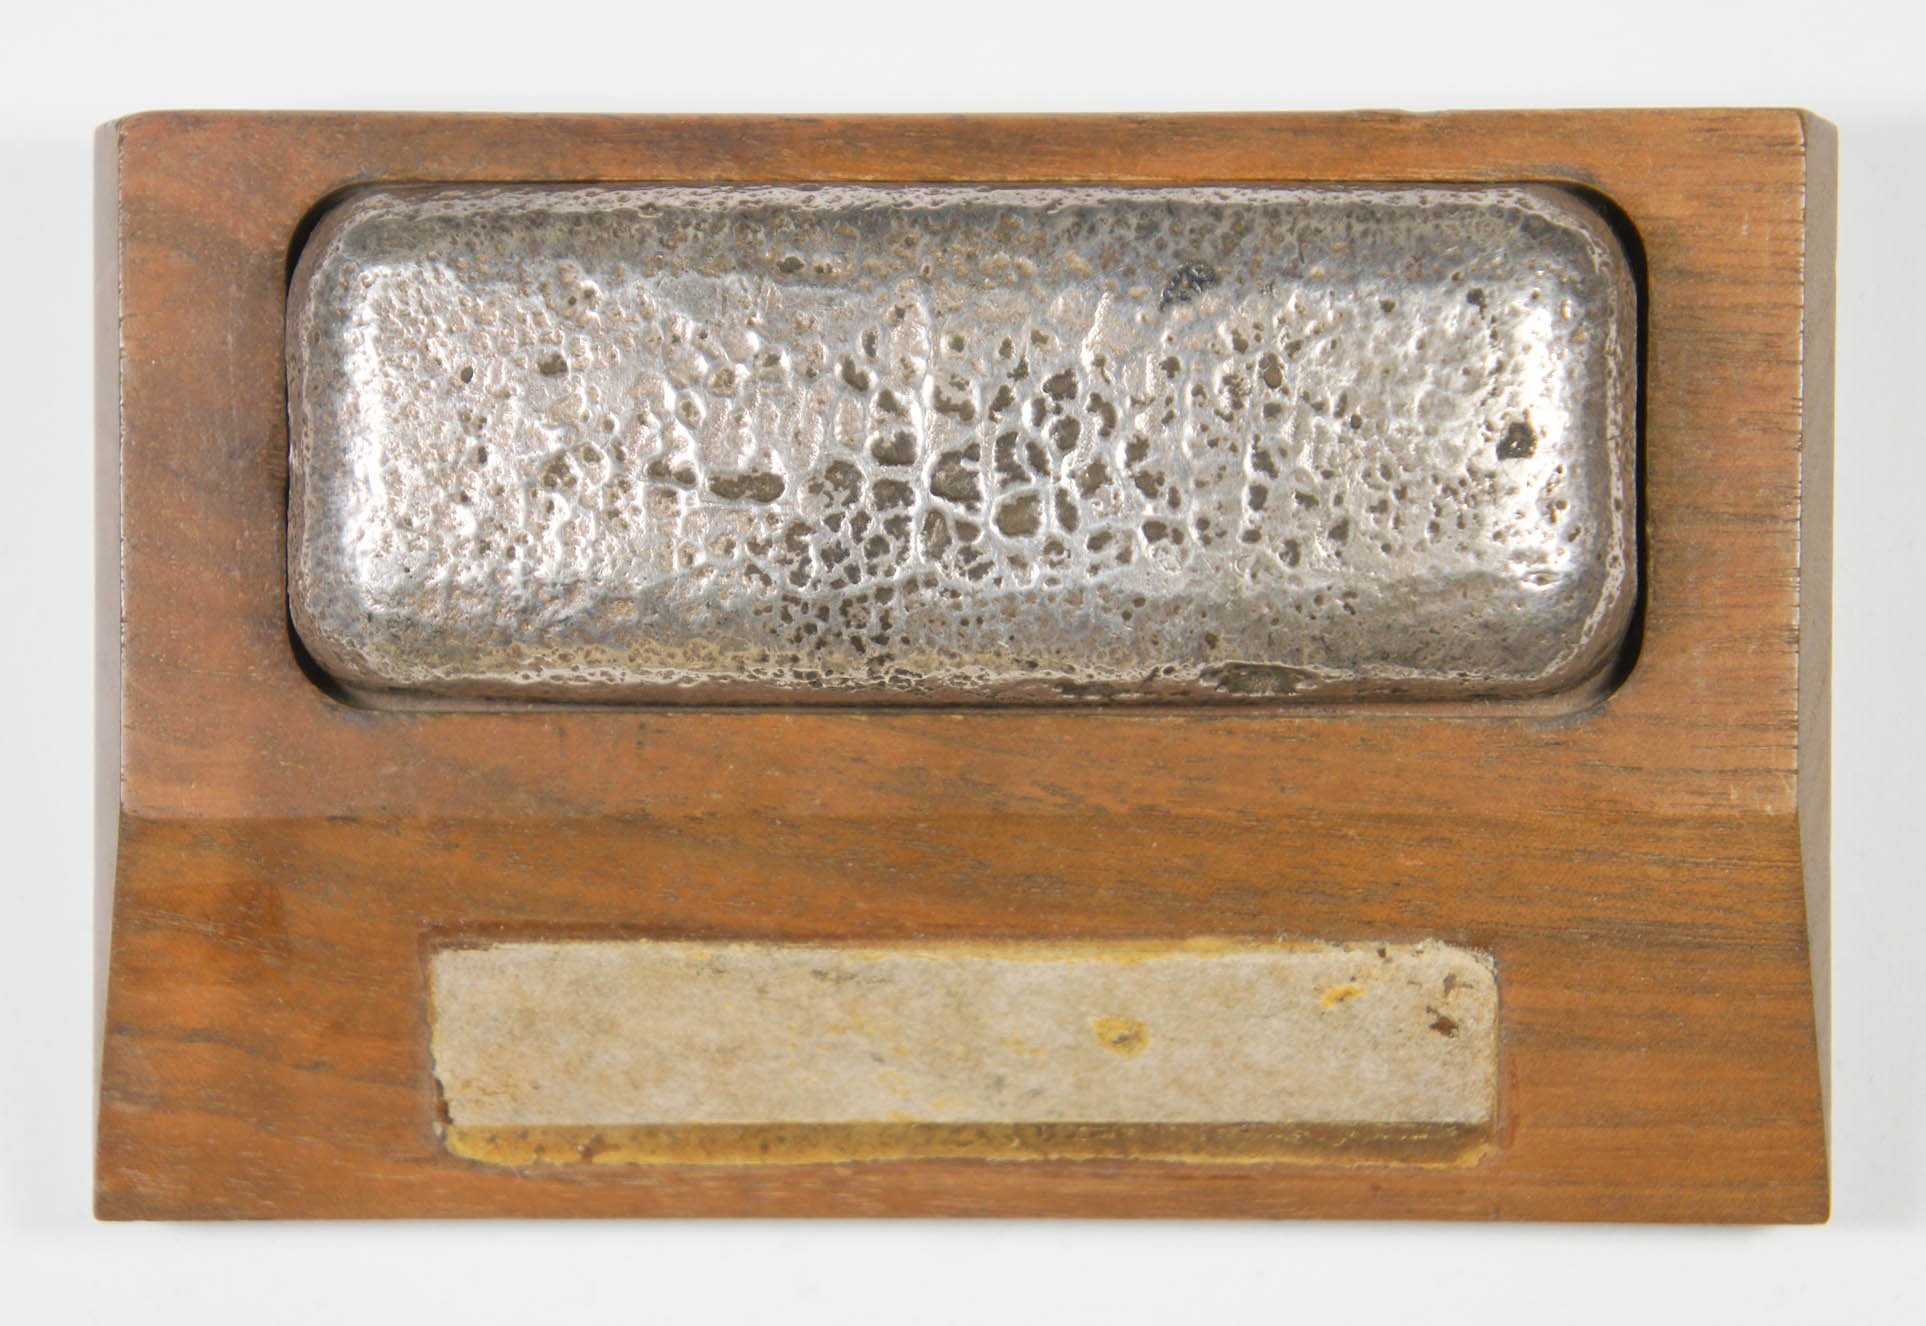 .999 Fine Silver Ingot Weighing 14.5 Troy Ounces